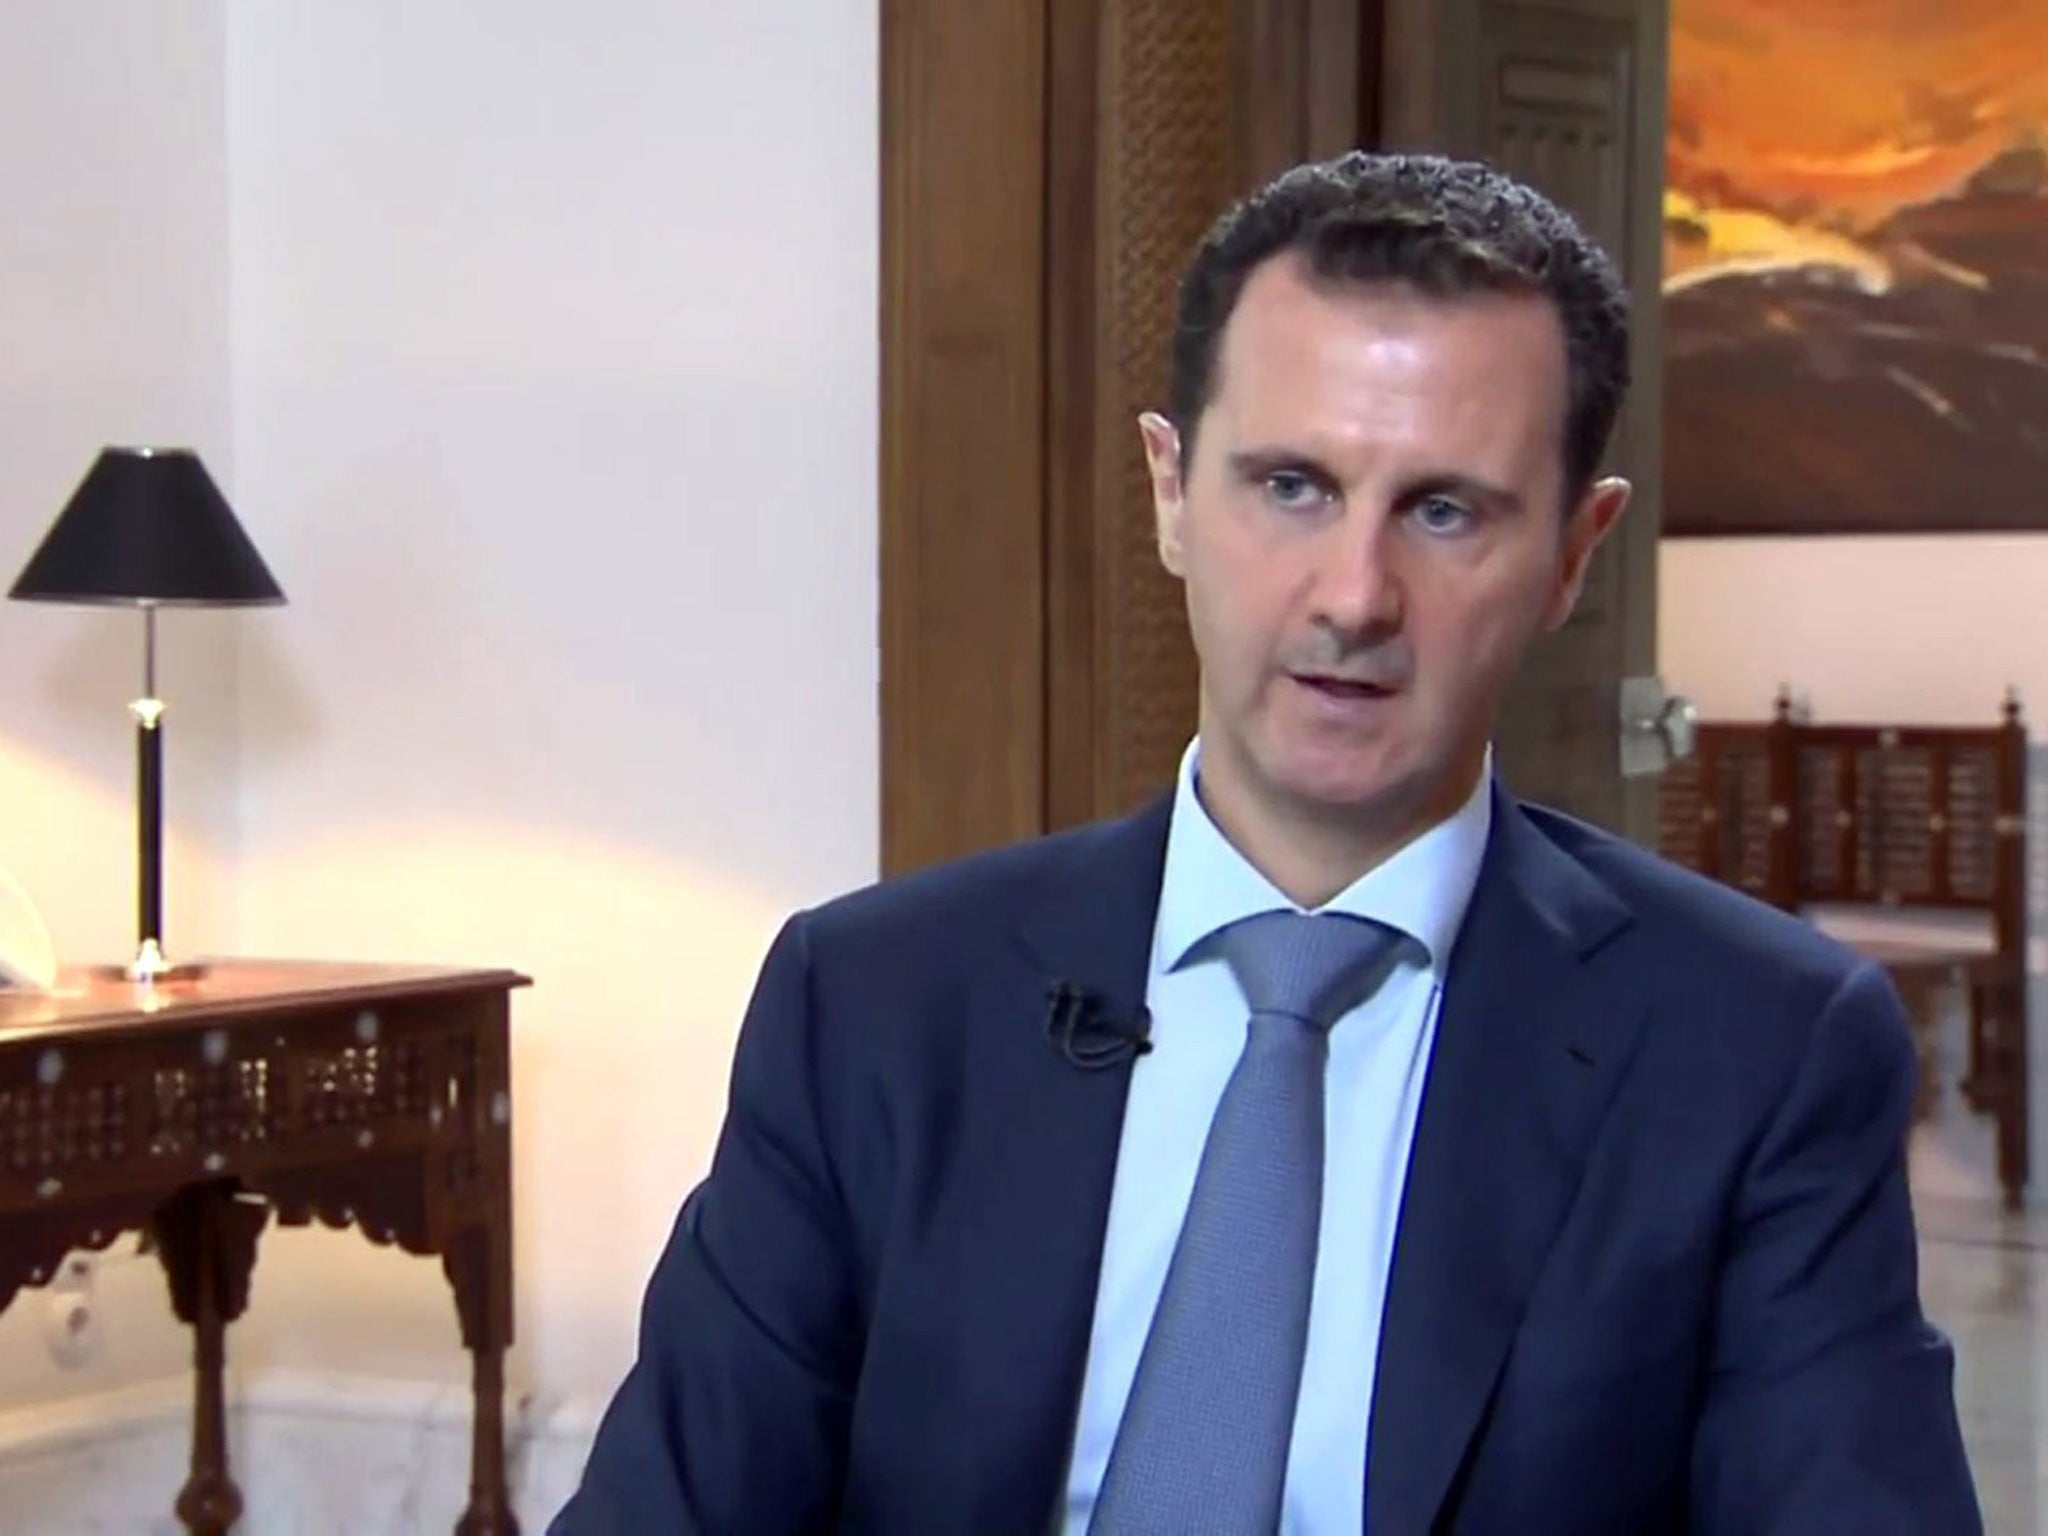 Syrian President Bashar al-Assad speaking during an interview in Damascus broadcast by Khabar TV